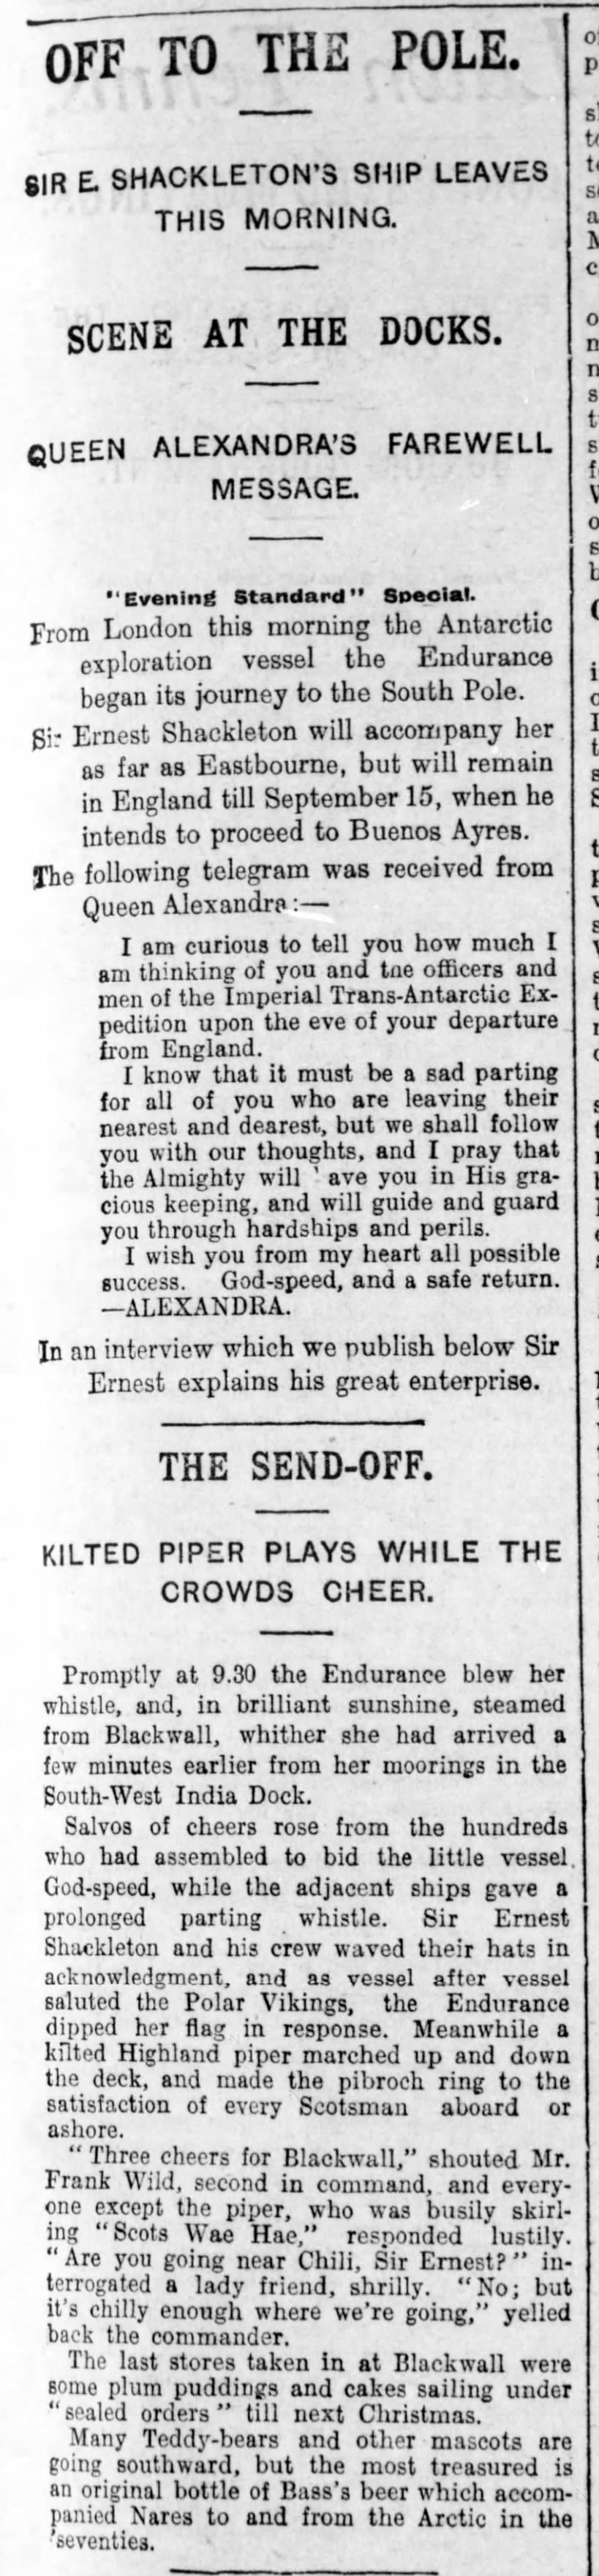 Shackleton's Imperial Trans-Antarctic Expedition leaves London; the queen sends farewell telegram